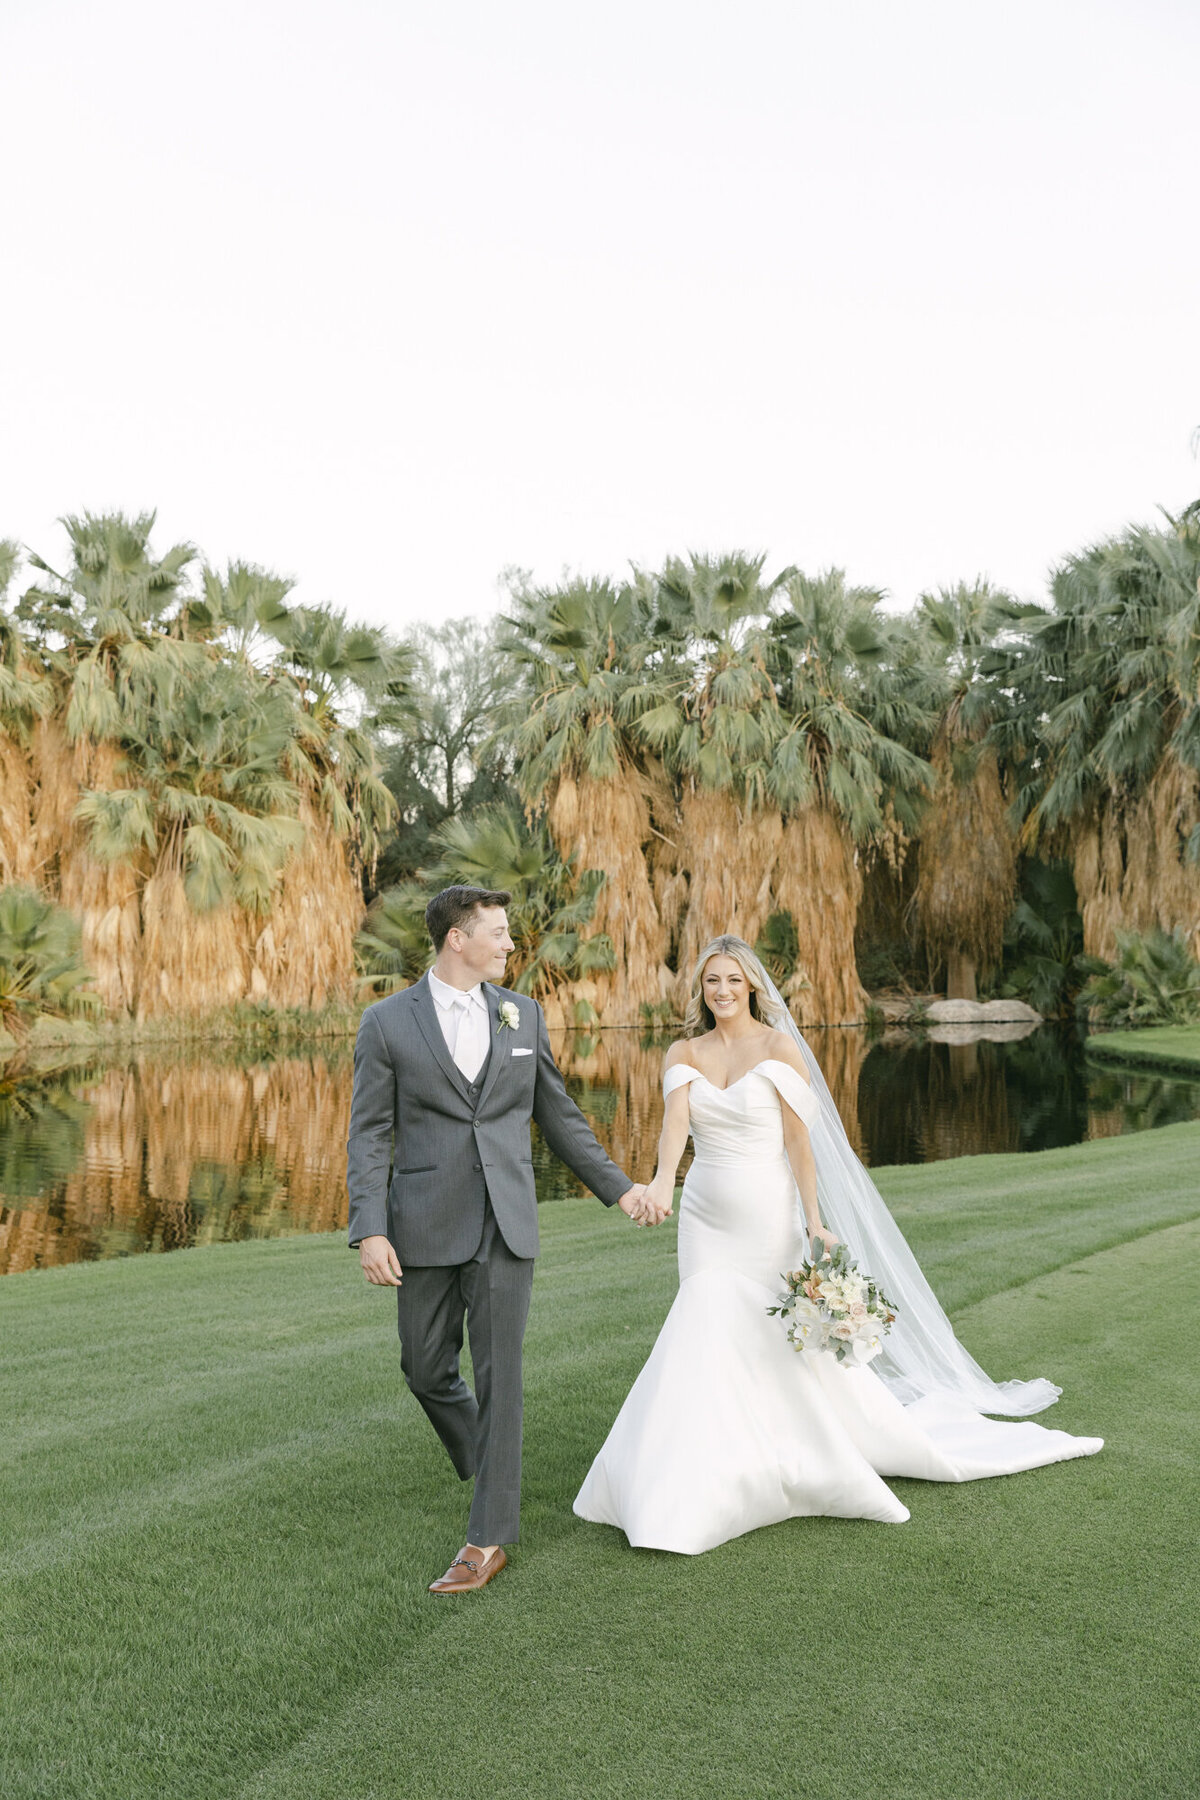 PERRUCCIPHOTO_DESERT_WILLOW_PALM_SPRINGS_WEDDING83